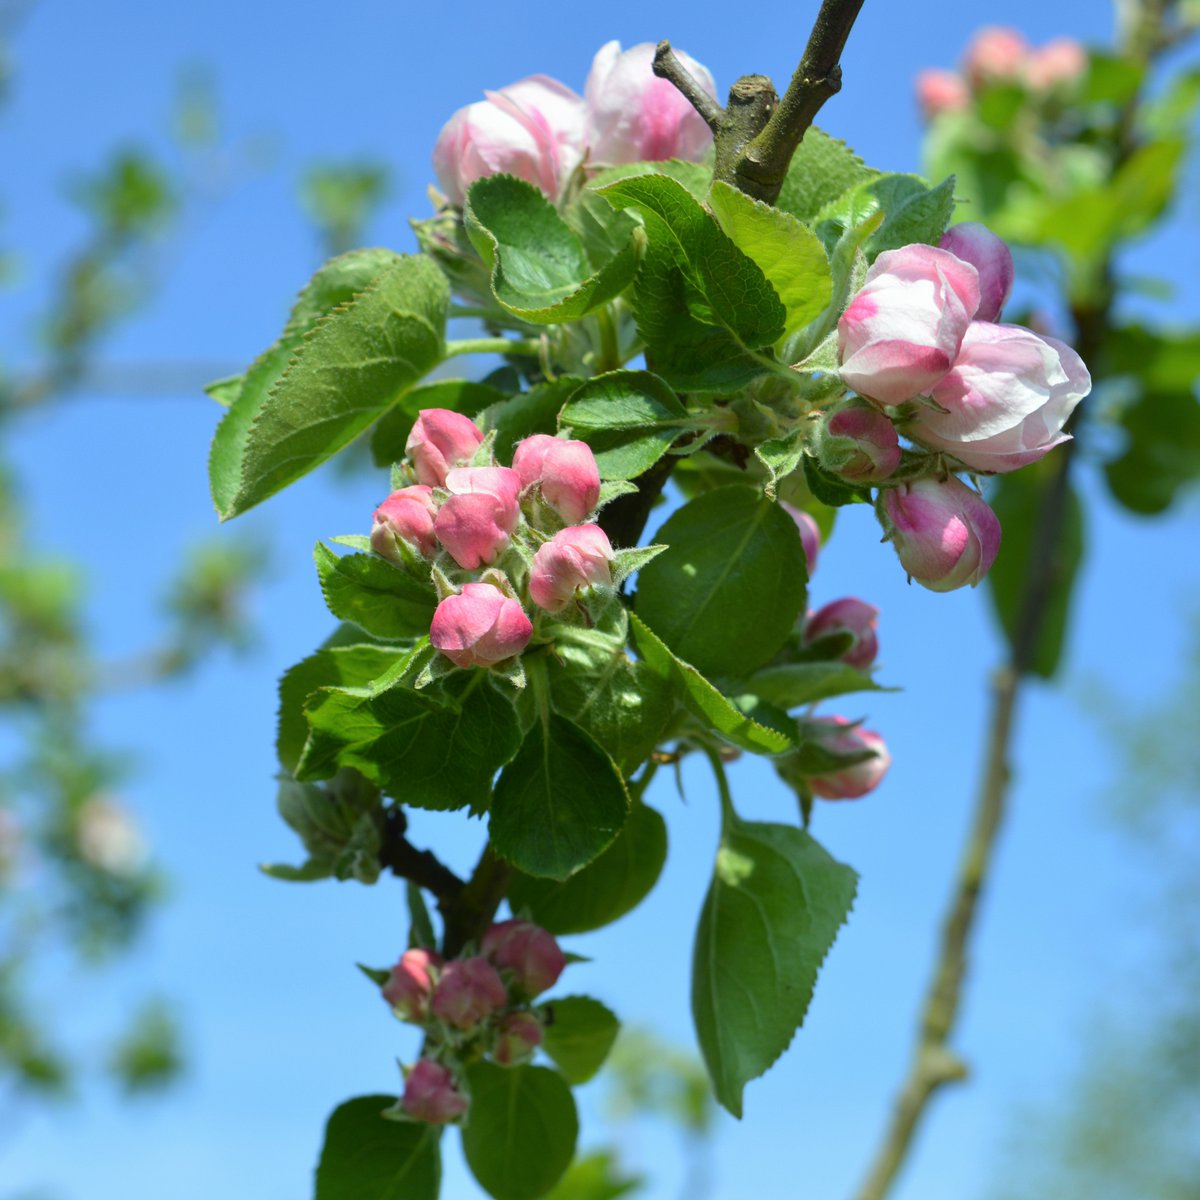 Hottest day of the year so far in #CarshaltonBeeches - more days like this please. #AppleBlossom in #QueenMarysPark